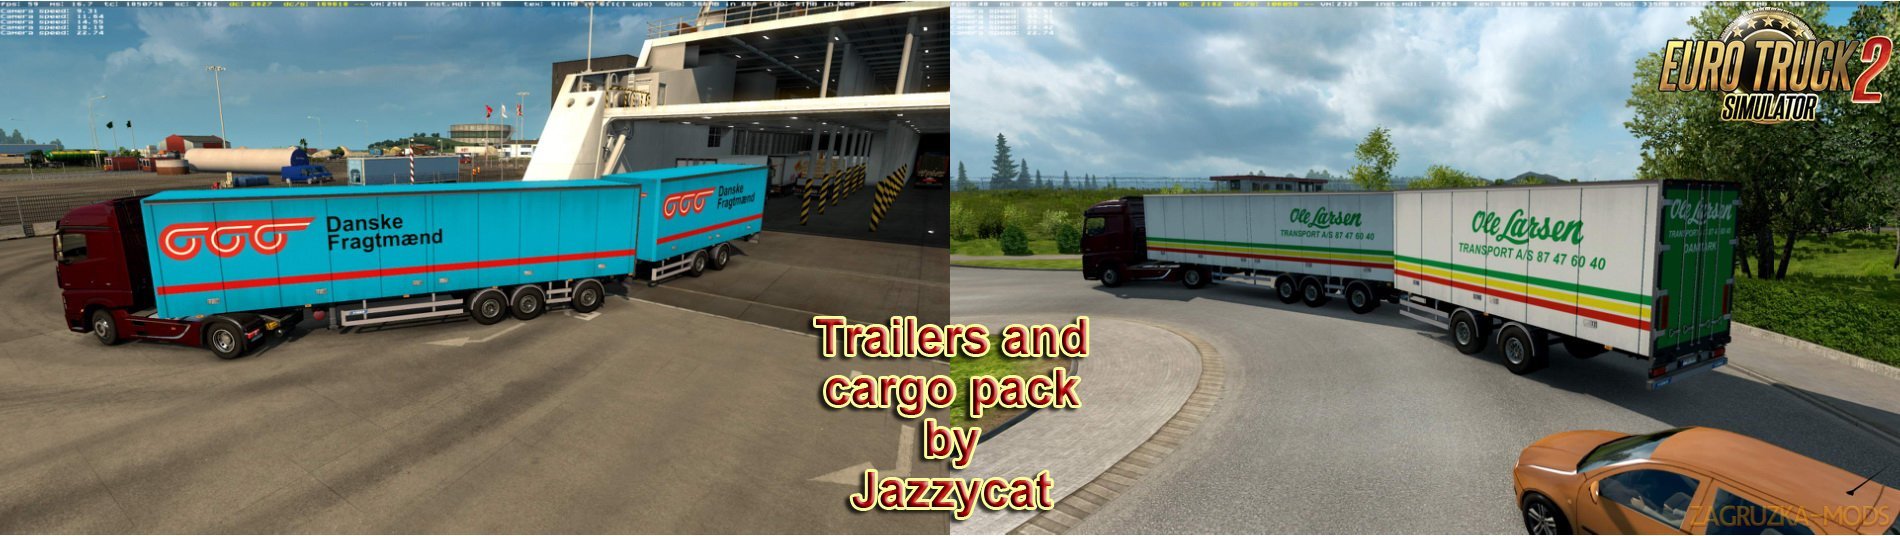 Trailers and Cargo Pack v5.3.1 by Jazzycat